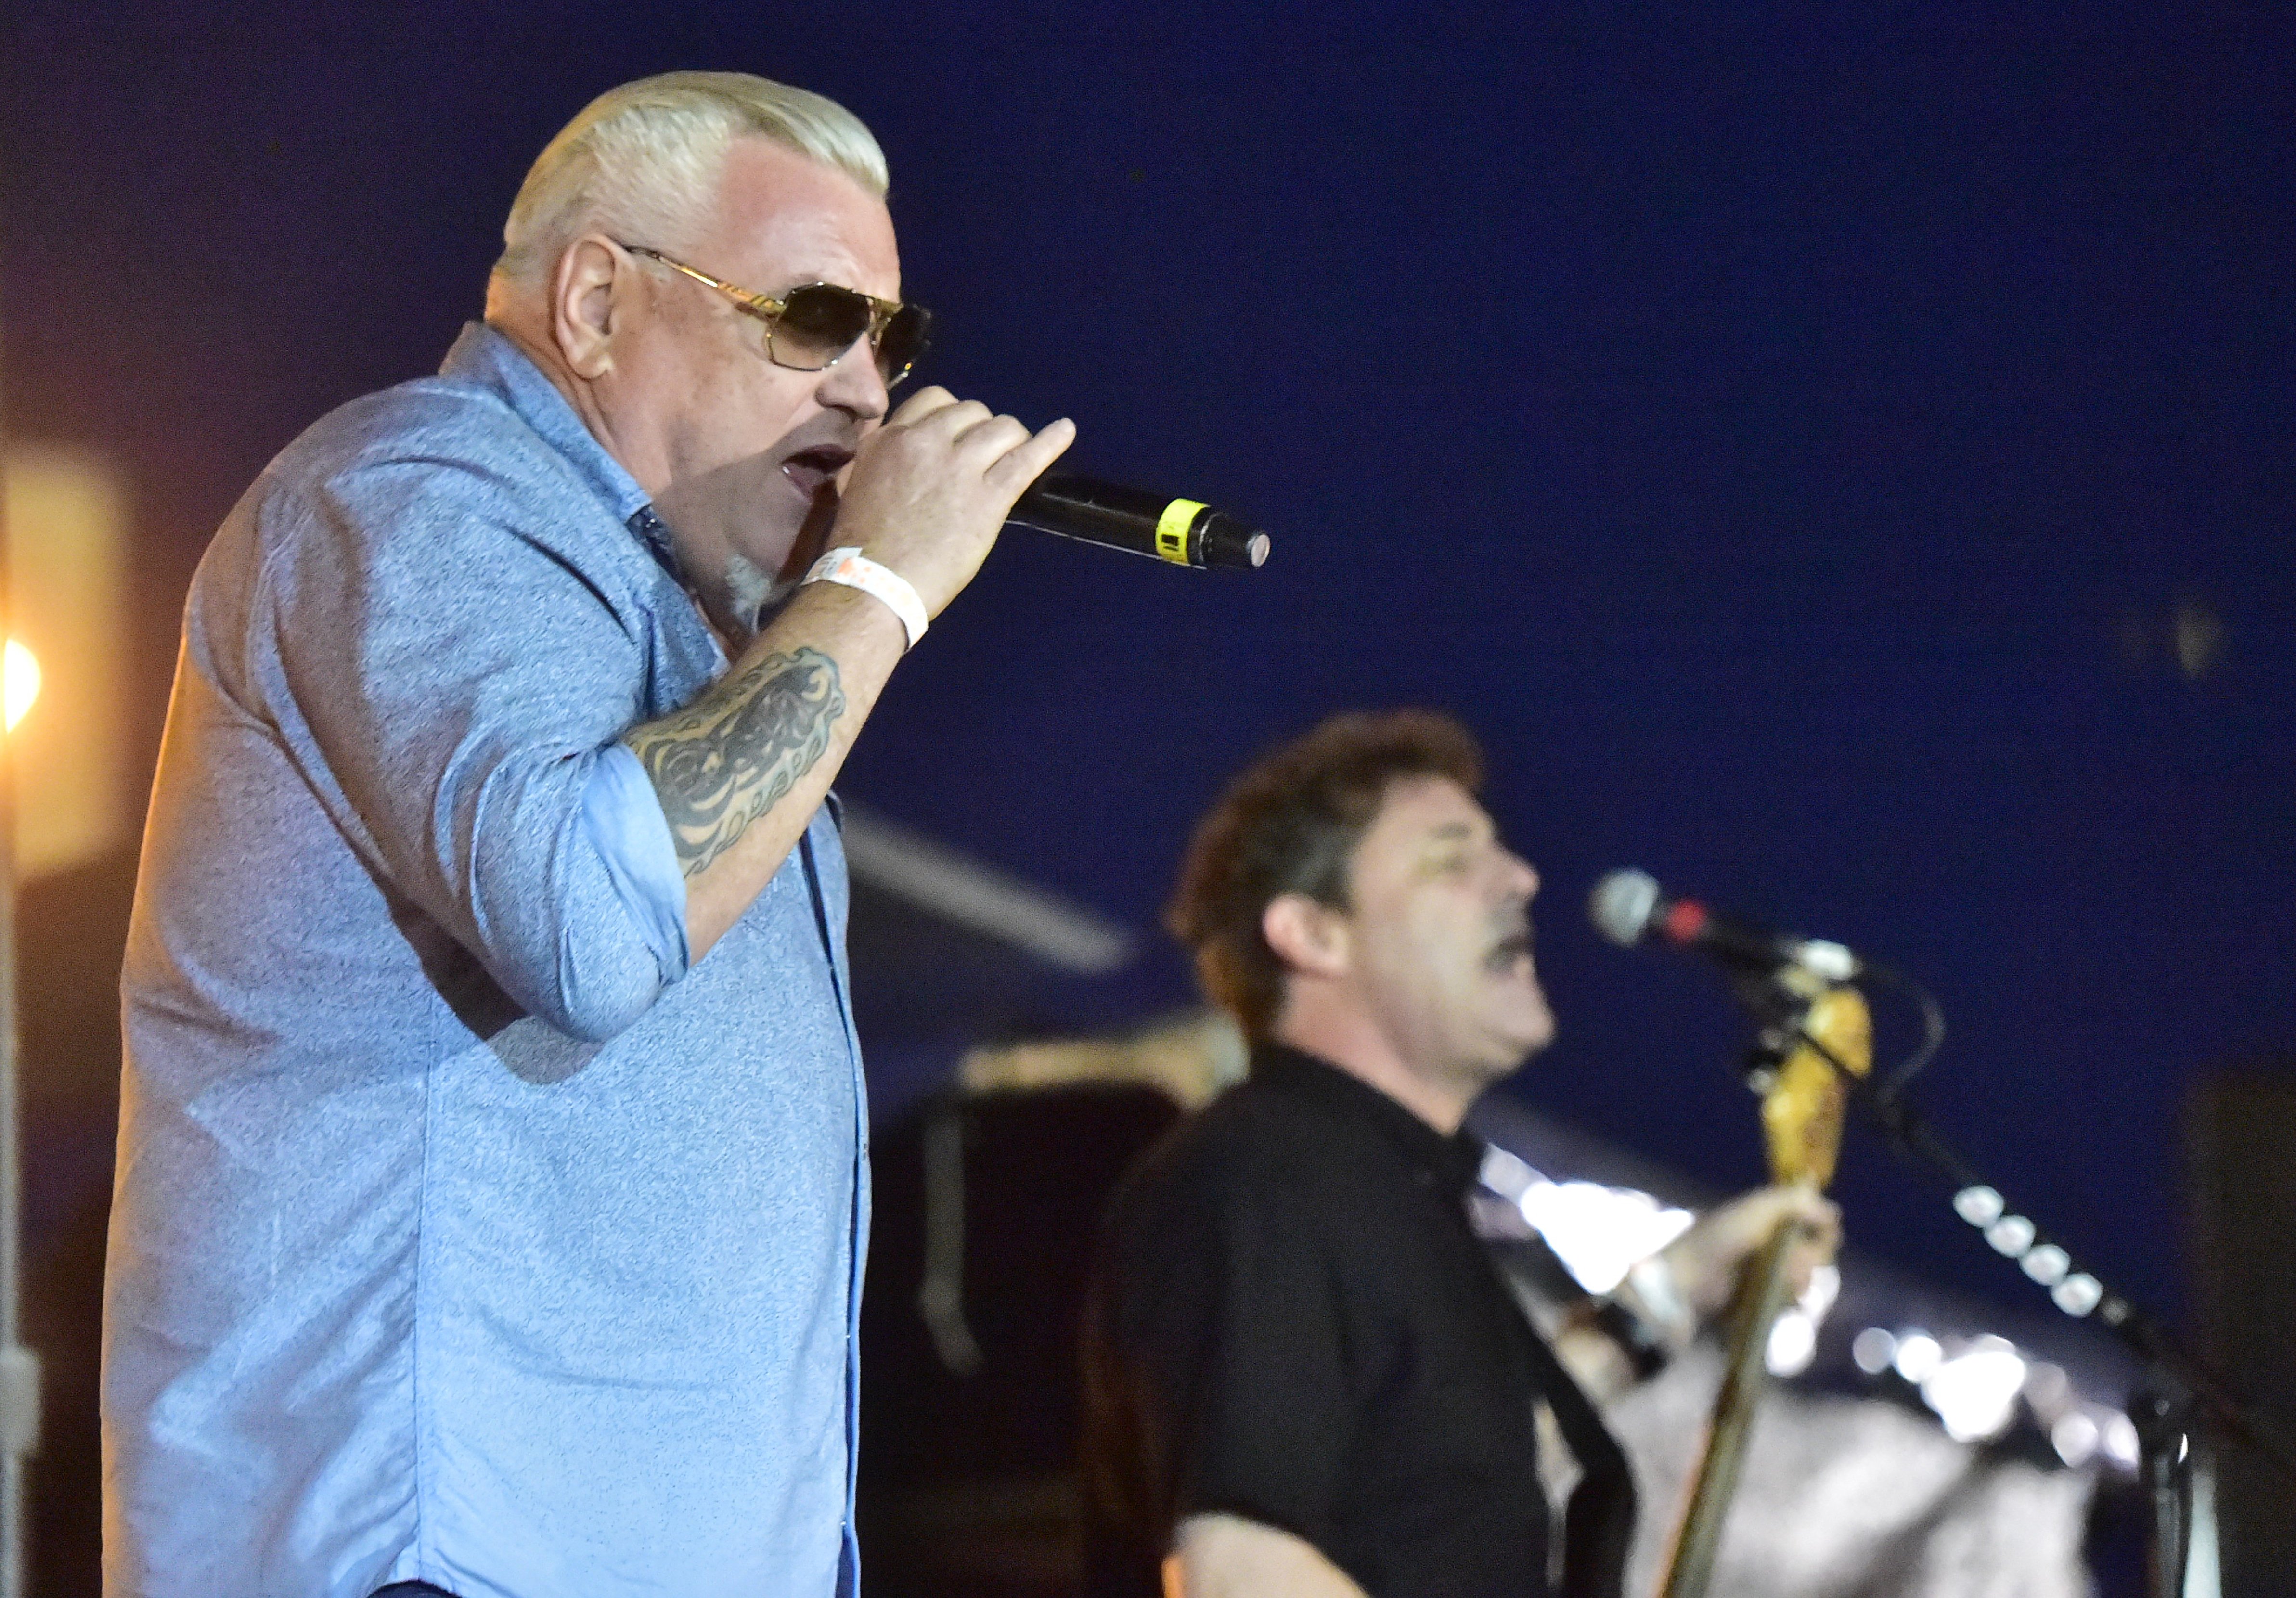 Smash Mouth singer Steve Harwell in hospice care with liver failure  (reports) 